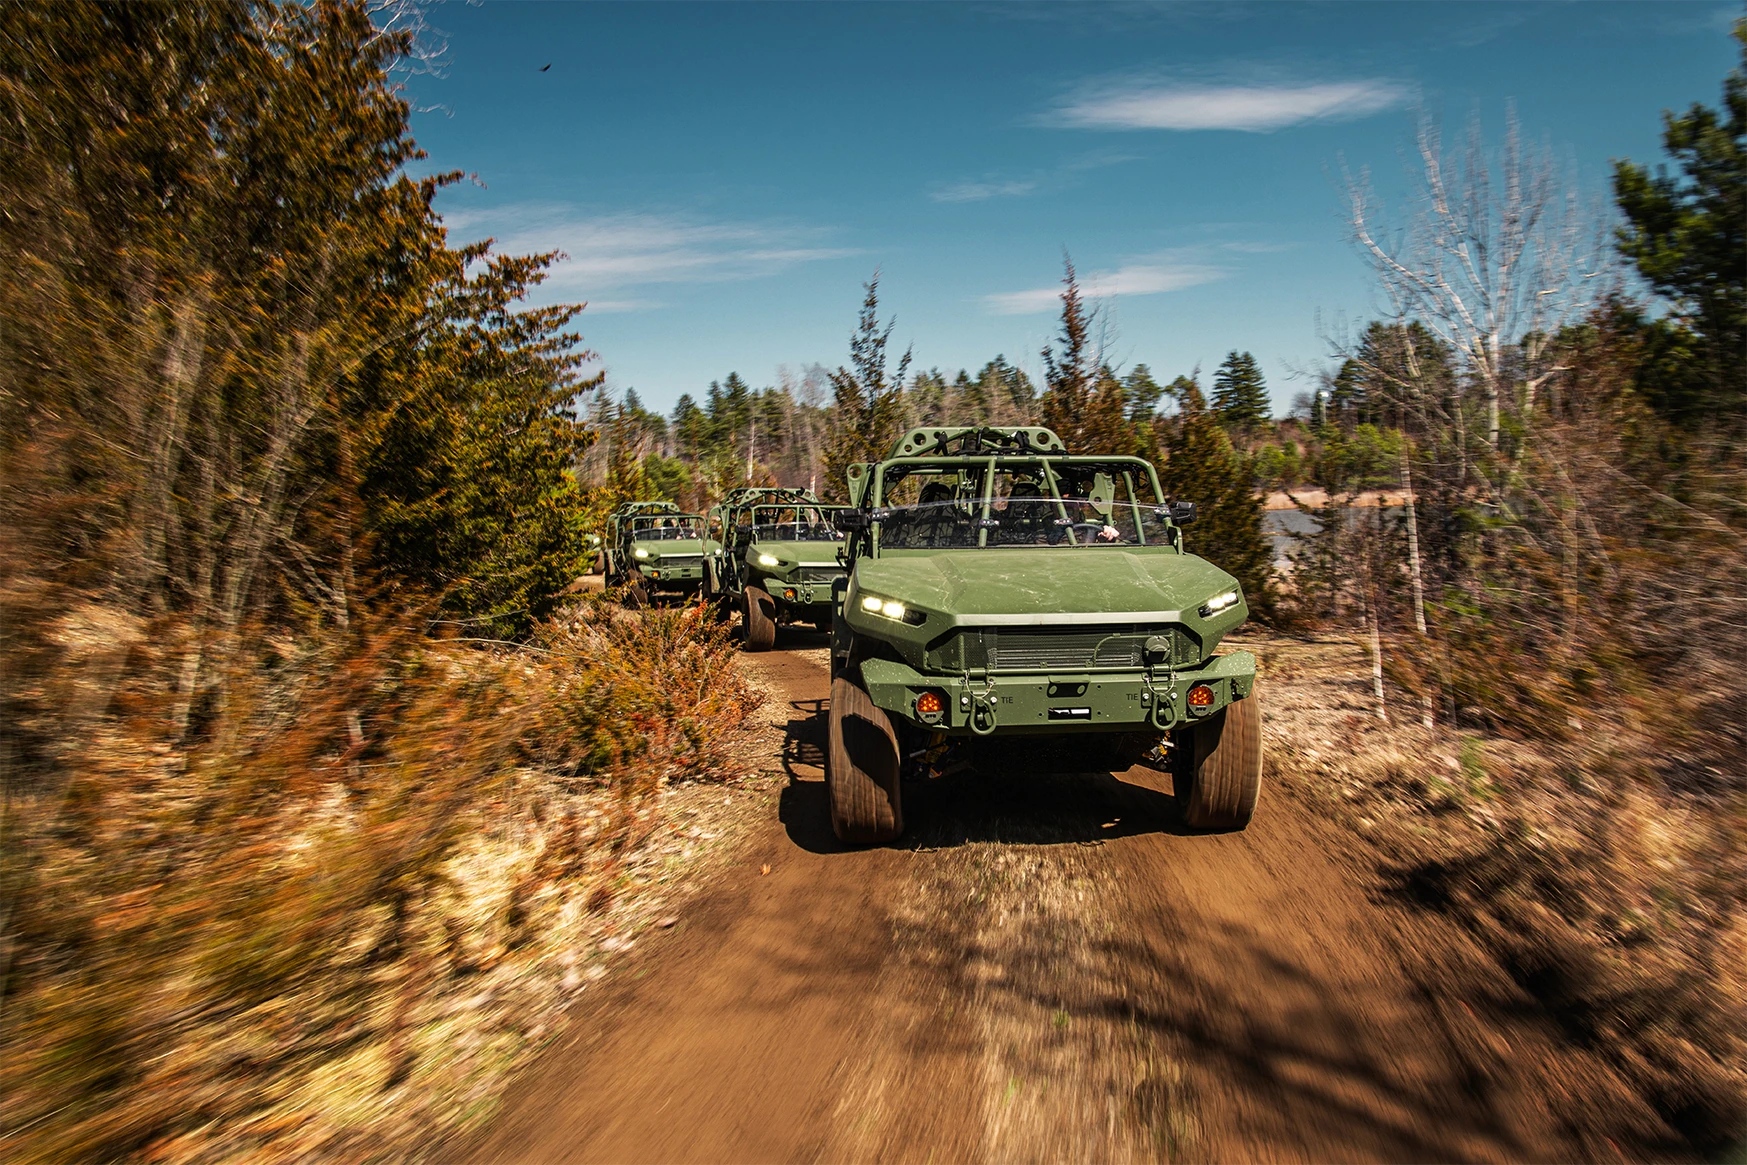 GM Defense is building the Army's Infantry Squad Vehicle, which is already being fielded to units. The company took an ISV and turned it into an all-electric concept vehicle to show the service the realm of the possible. (Courtesy of GM Defense)